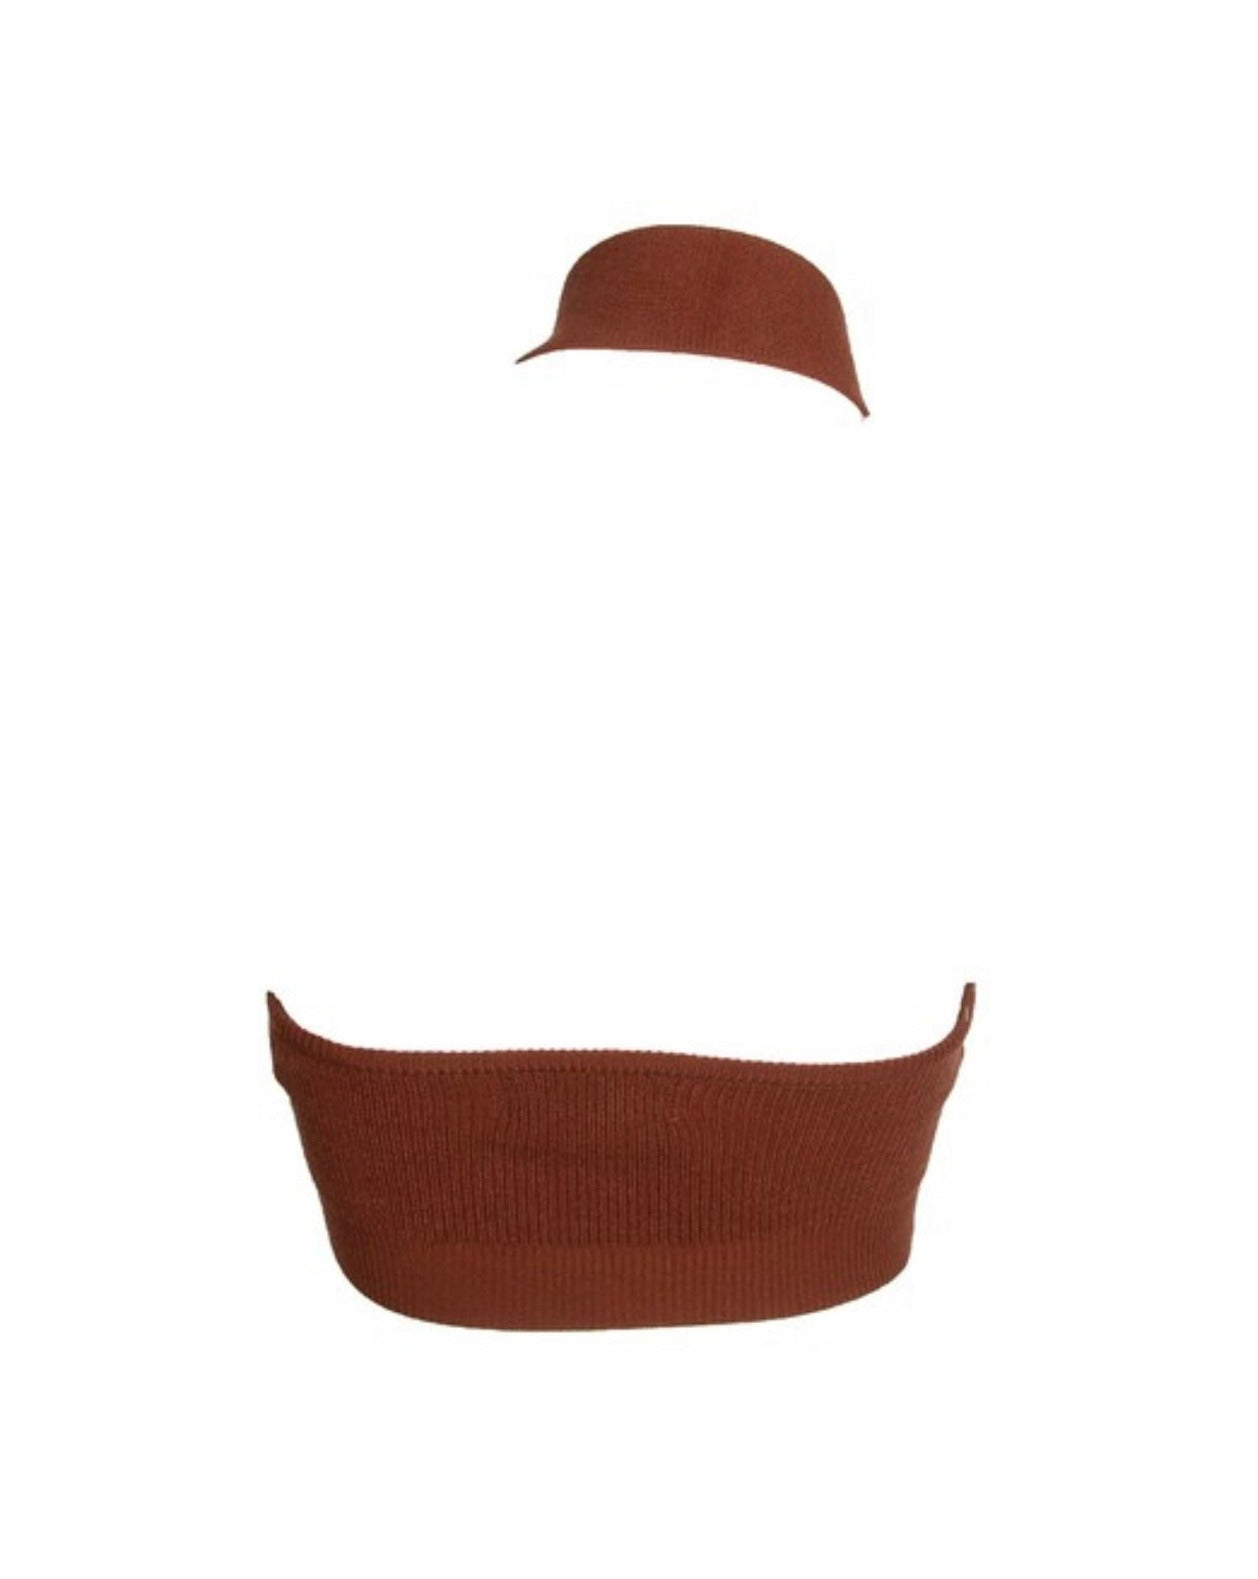 Close-up view of the halter twist detail on the Brown Rib Knit Crop Top, emphasizing its stylish and distinctive design.